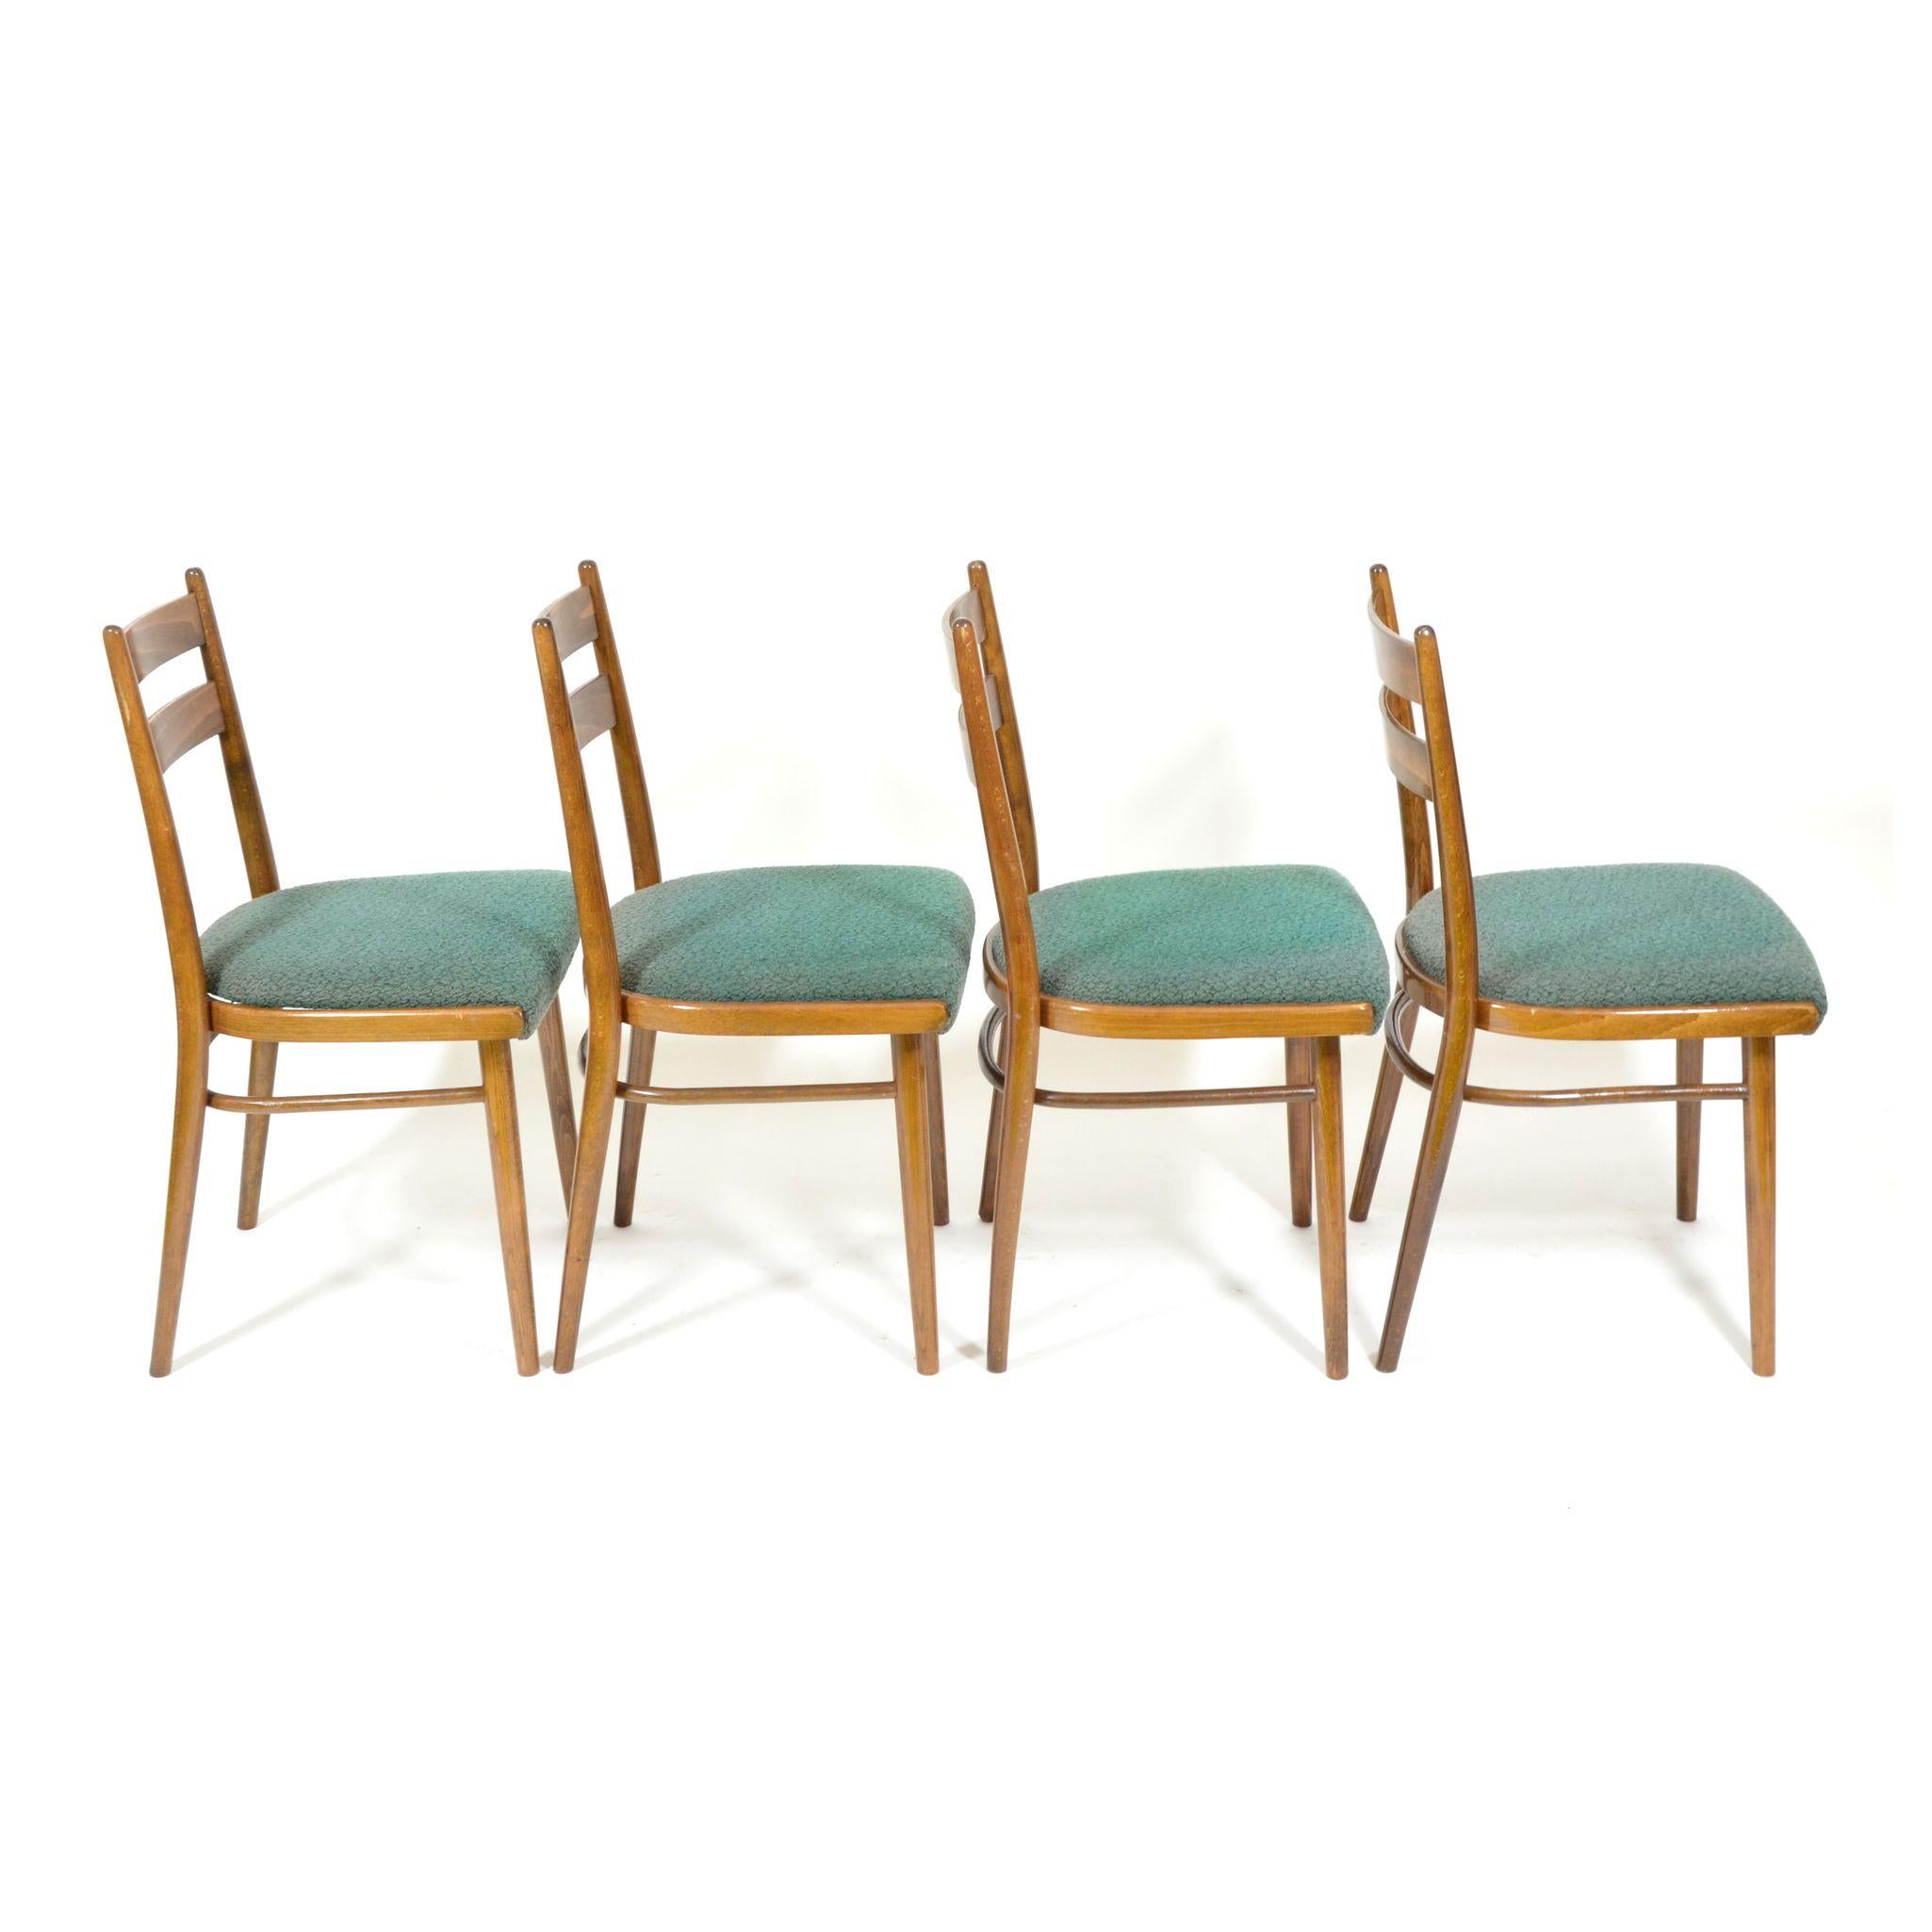 Fabric Set of Four Vintage Dining Chairs, Green Seats, Czechoslovakia, 1970s